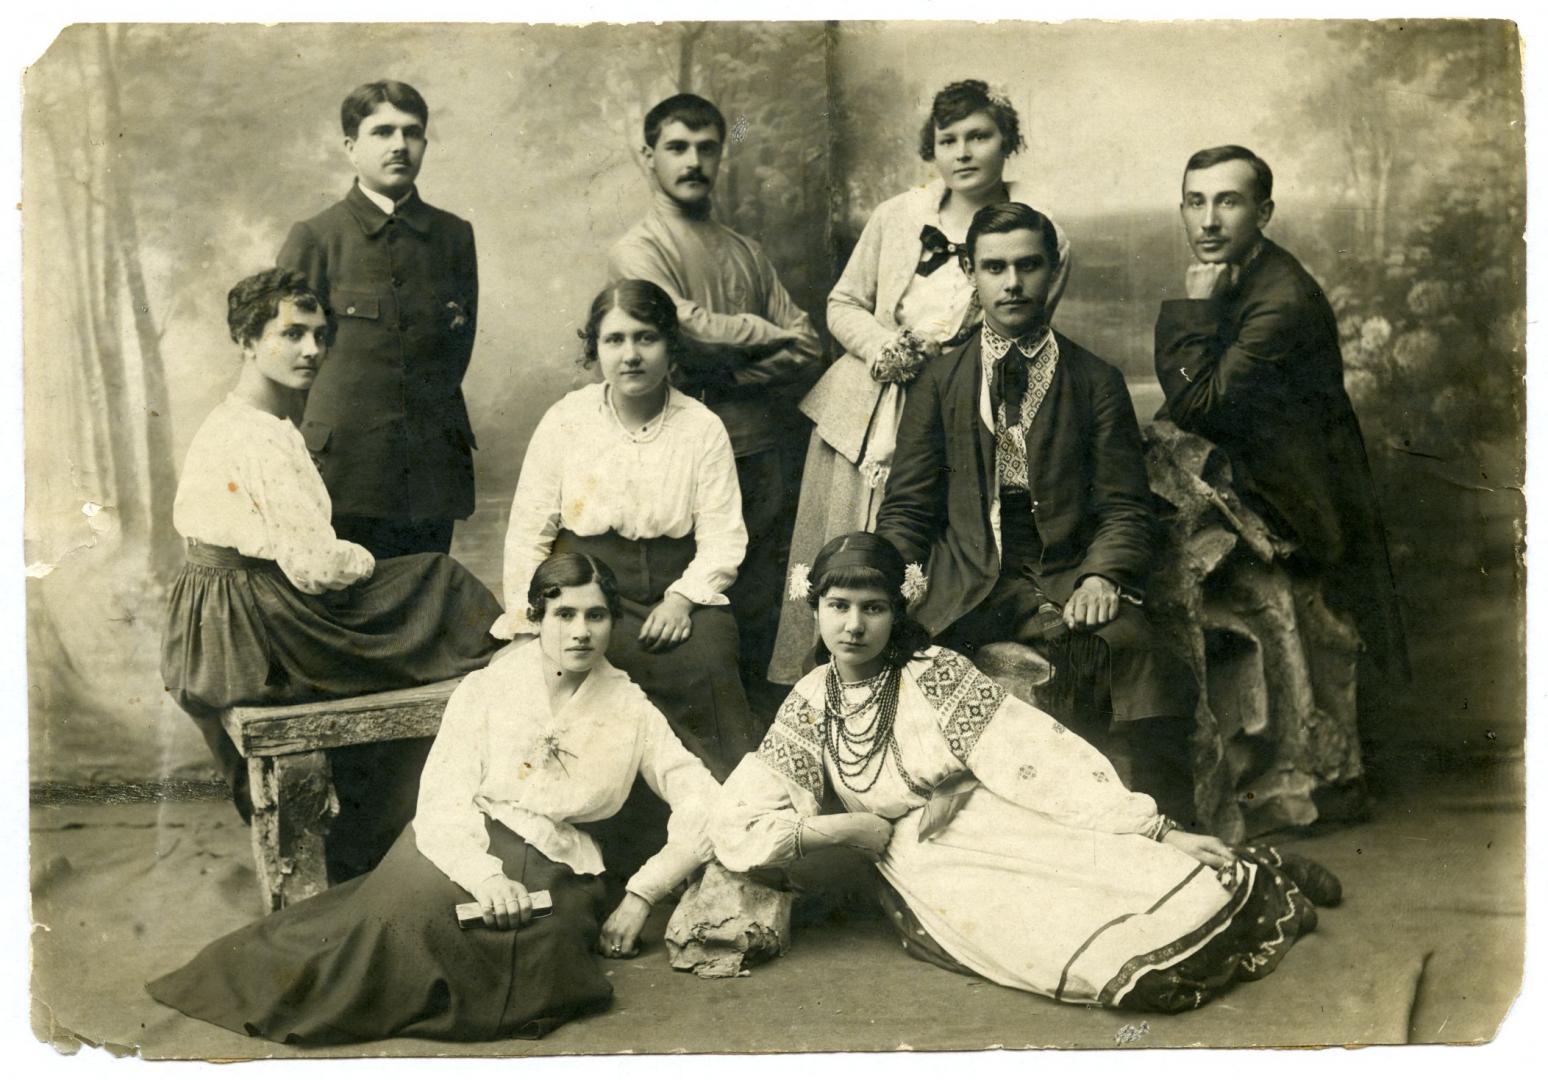 Photo. A group of young people wearing folk and urban upper-middle class attire